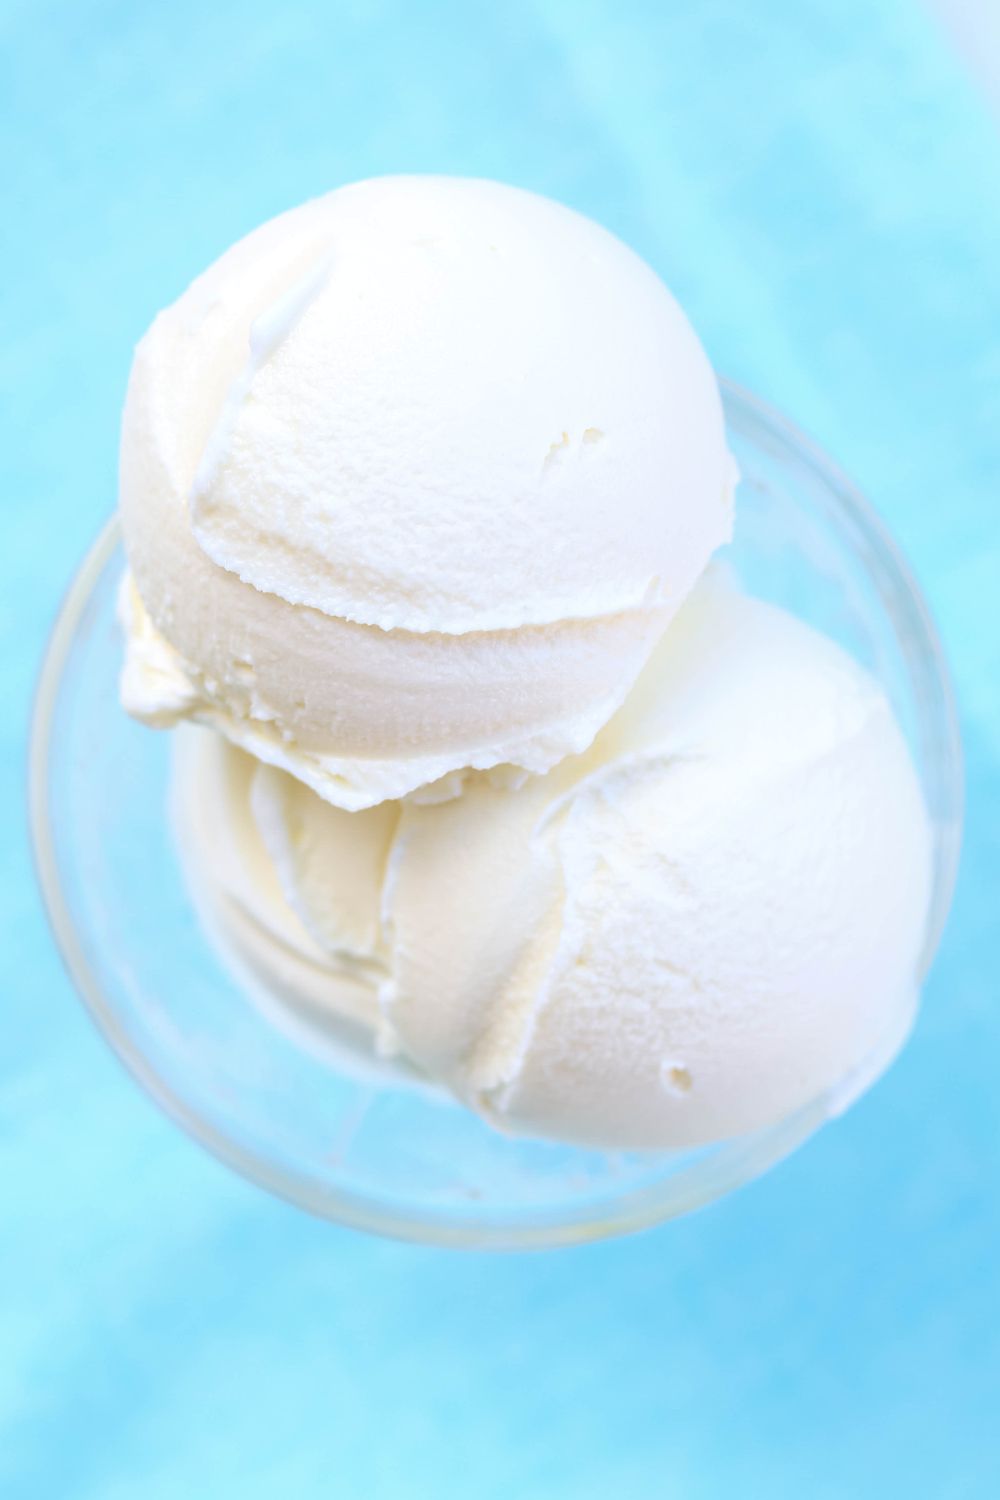 close-up view of scoops of silky smooth Ninja Creami vanilla ice cream made with Cool Whip, served in a glass dish.